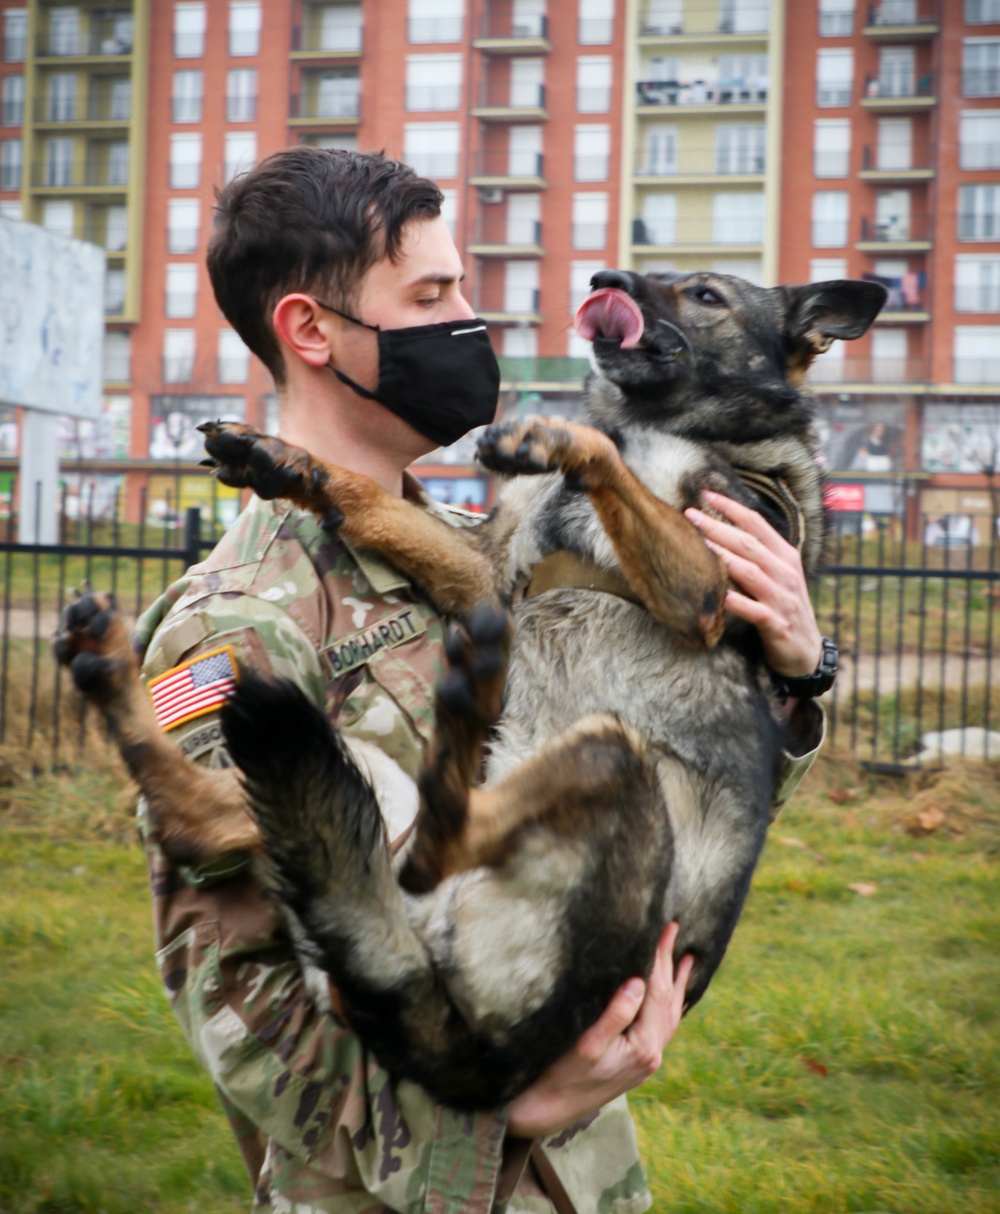 U.S. Army Soldier builds unbreakable bond with military working dog